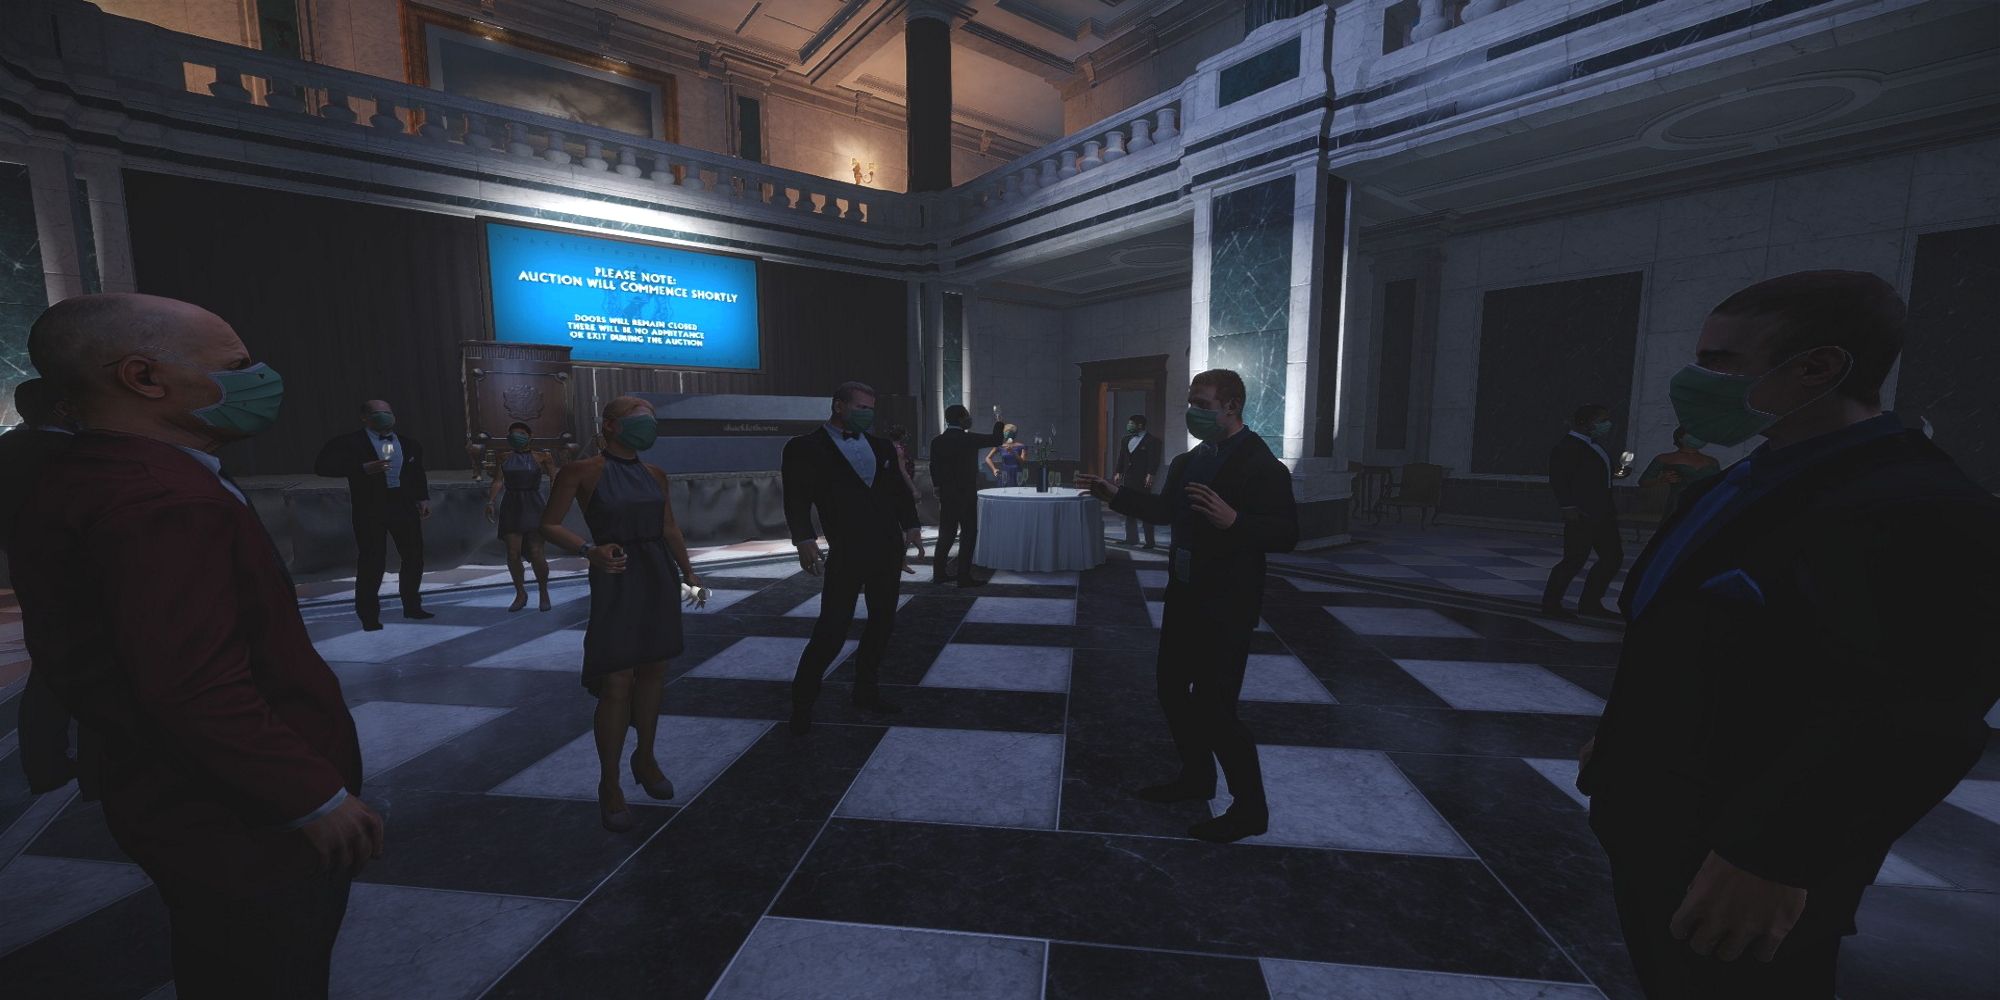 how to install mods payday 2